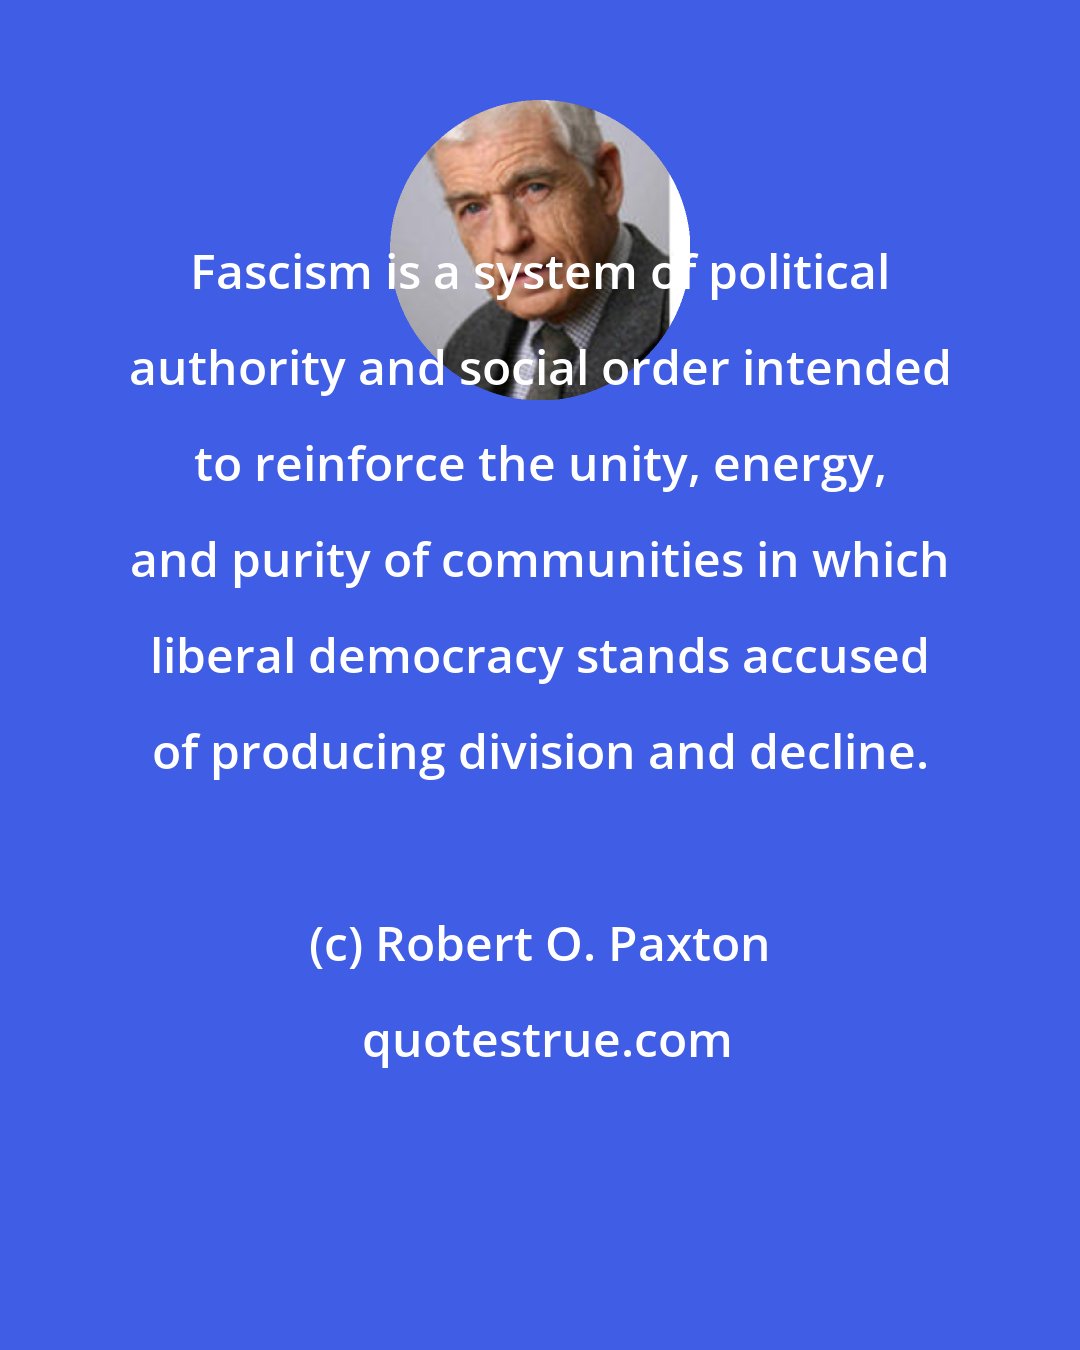 Robert O. Paxton: Fascism is a system of political authority and social order intended to reinforce the unity, energy, and purity of communities in which liberal democracy stands accused of producing division and decline.